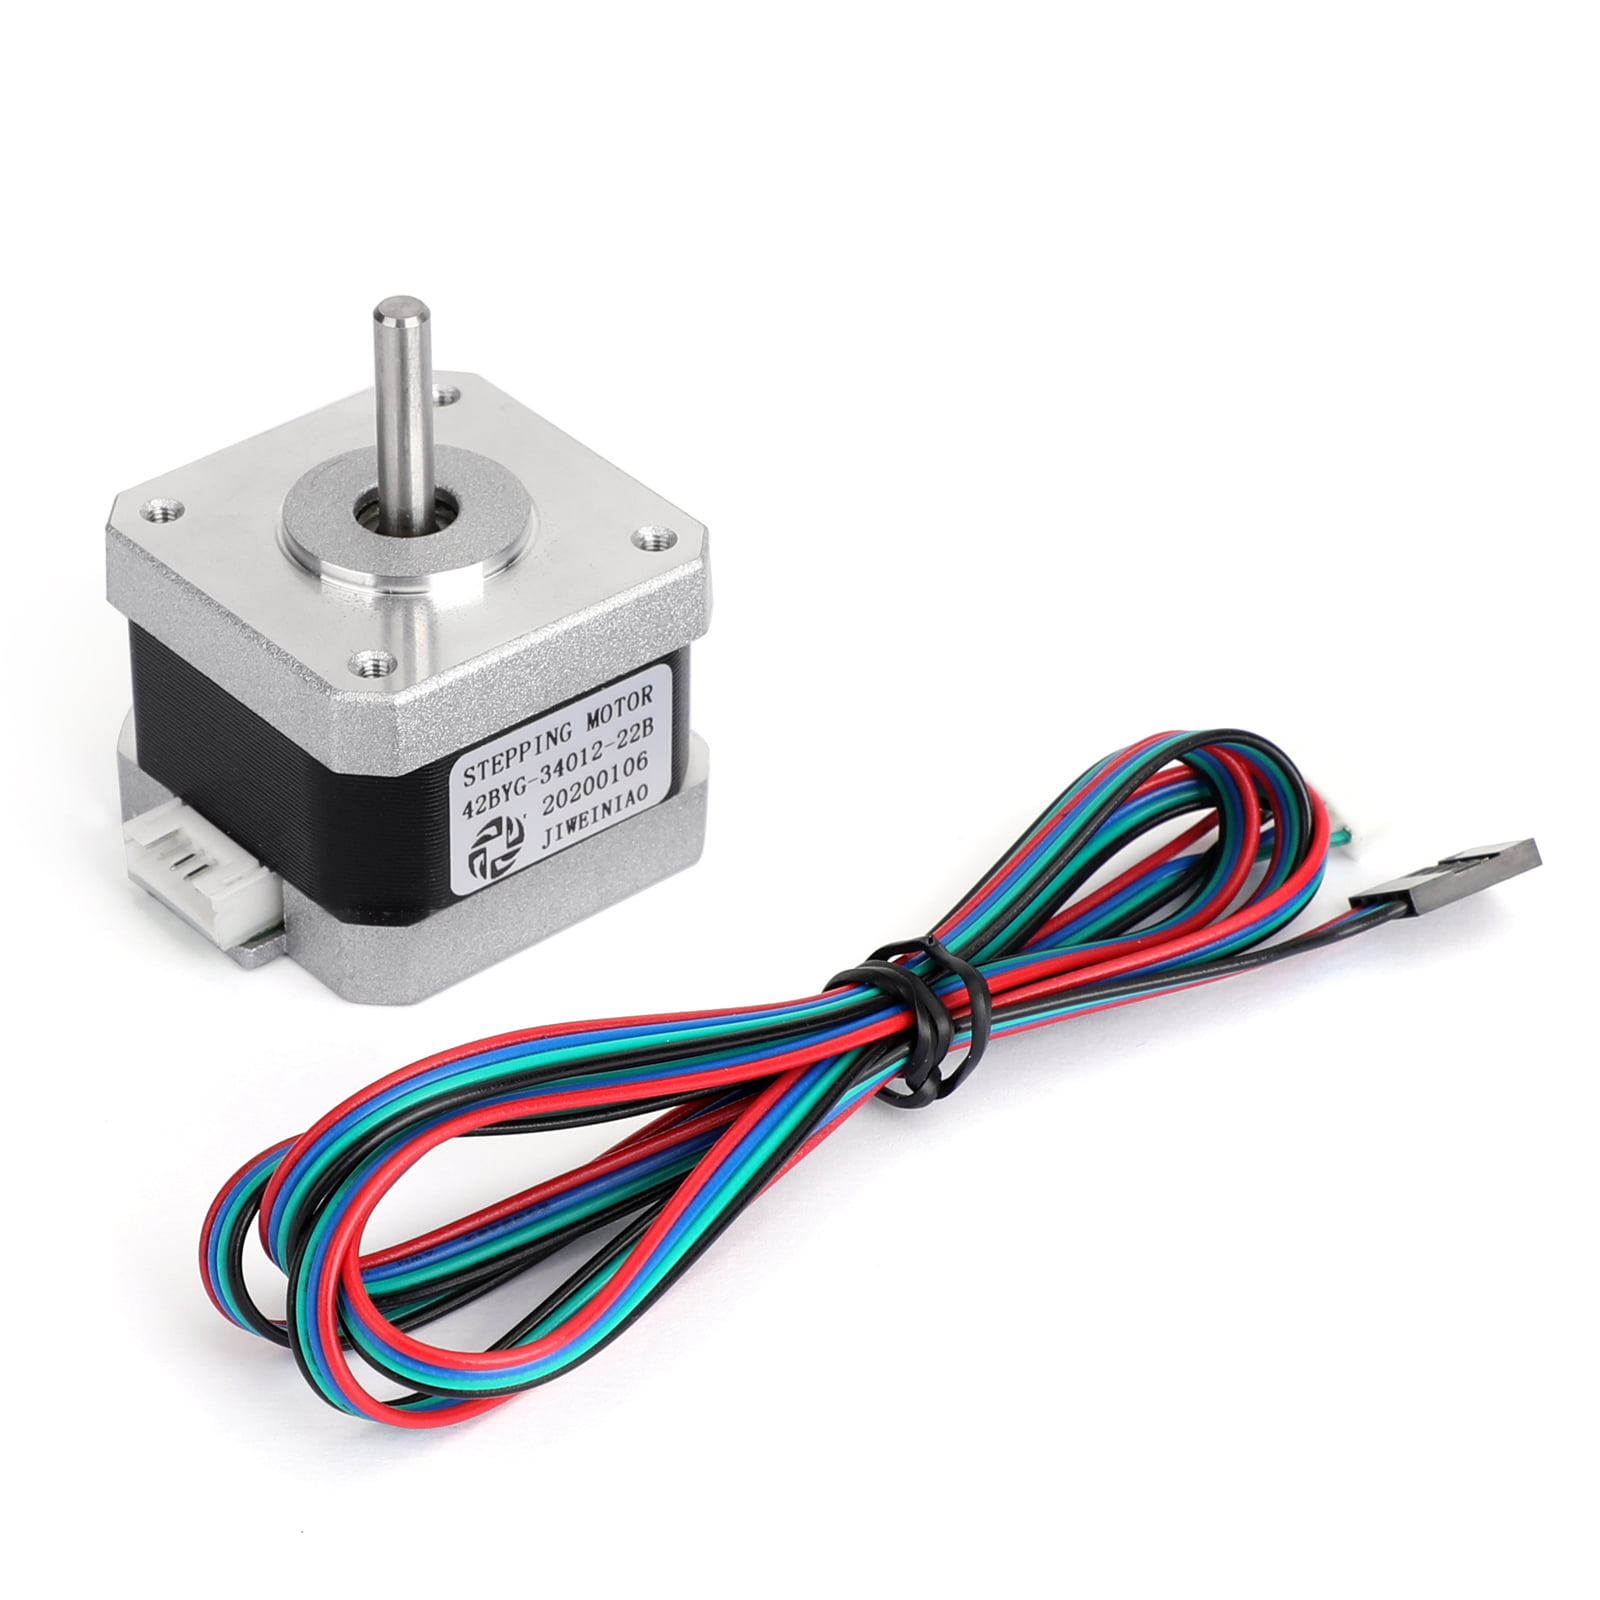 1.8 Degree 42mm NEMA17 2 Phase 4-wire Metal Stepper Motor For 3D Printer Or CNC 